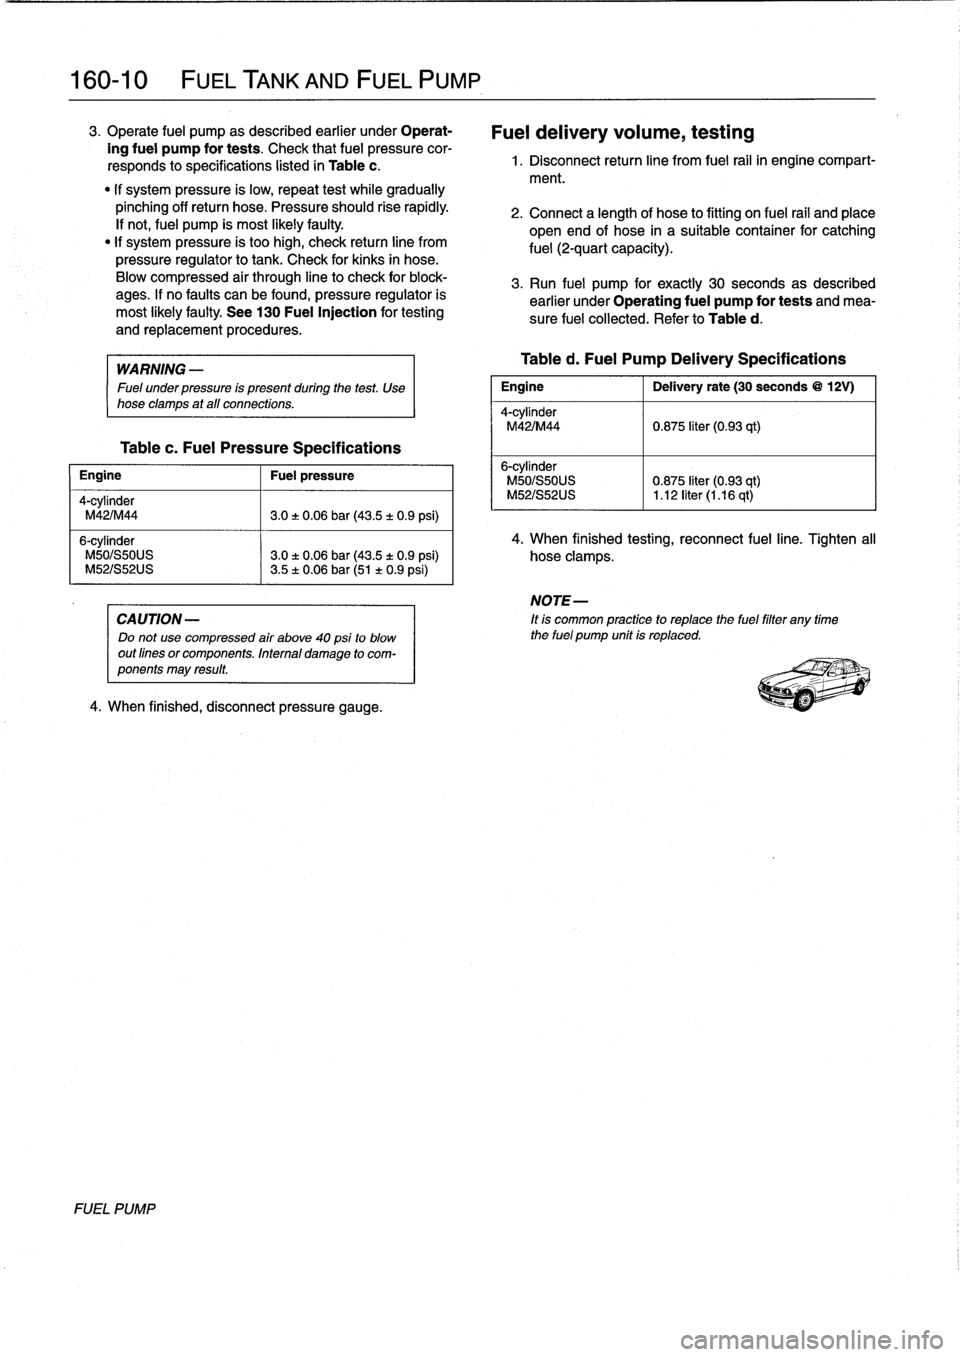 BMW 328i 1992 E36 Workshop Manual 
160-
1
0

	

FUEL
TANK
AND
FUEL
PUMP

3
.
Operate
fuel
pump
as
described
earlier
under
Operat-

ing
fuel
pump
for
tests
.
Check
that
fuel
pressure
cor-

responds
to
specifications
listed
in
Table
c
.